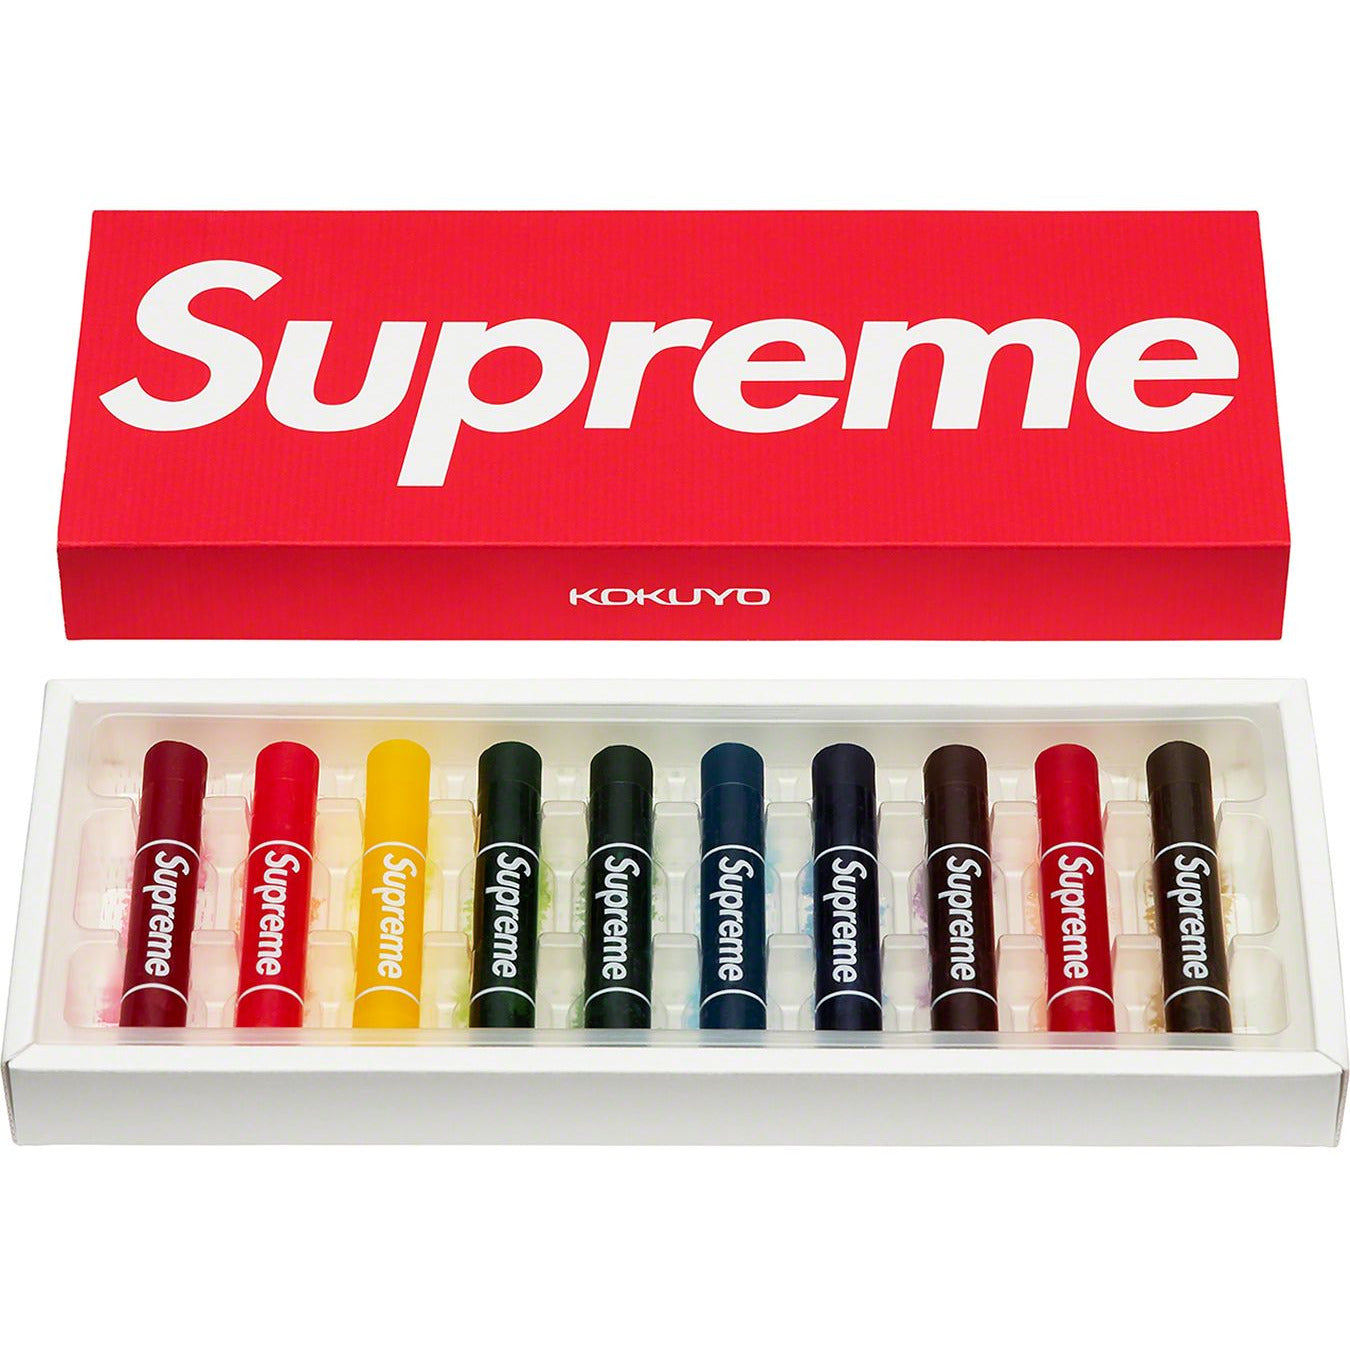 Supreme Kokuyo Translucent Crayons (Pack of 10) Multicolor by Supreme from £65.00